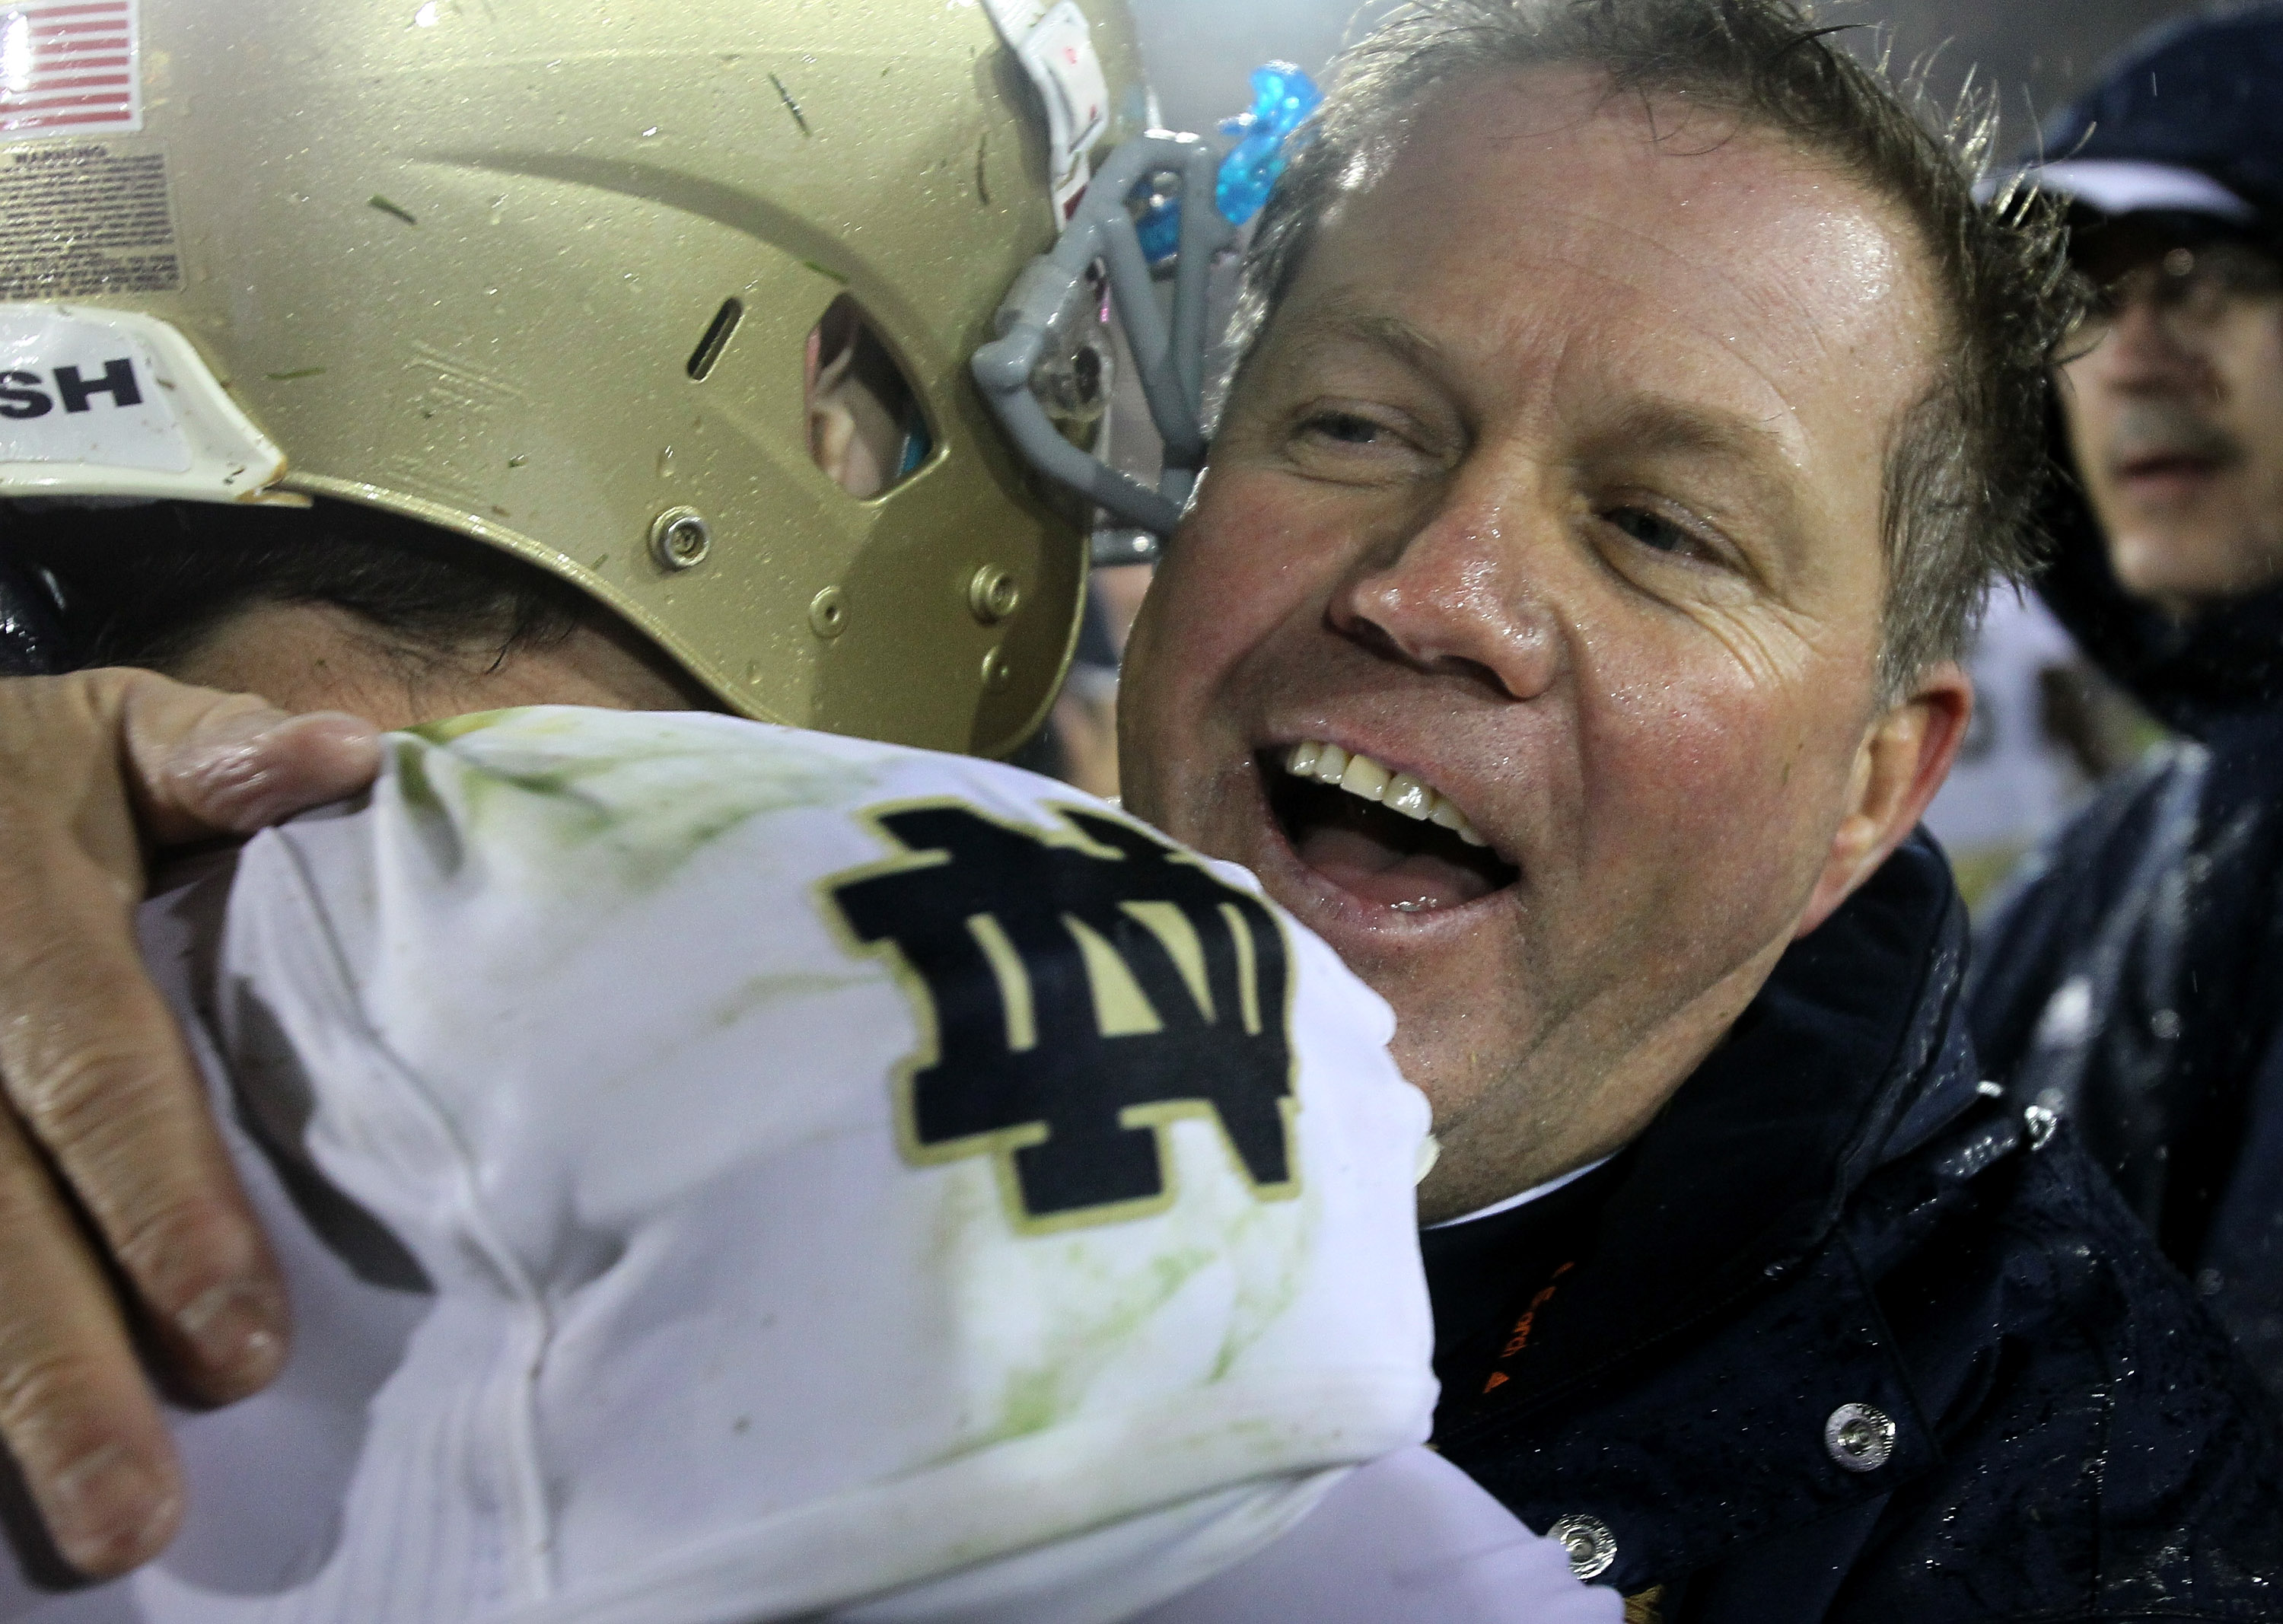 LOS ANGELES, CA - NOVEMBER 27:  Head coach Brian Kelly and quarterback Tommy Rees #13 of the Notre Dame Fighting Irish embrace after the game against the USC Trojans at the Los Angeles Memorial Coliseum on November 27, 2010 in Los Angeles, California.  No